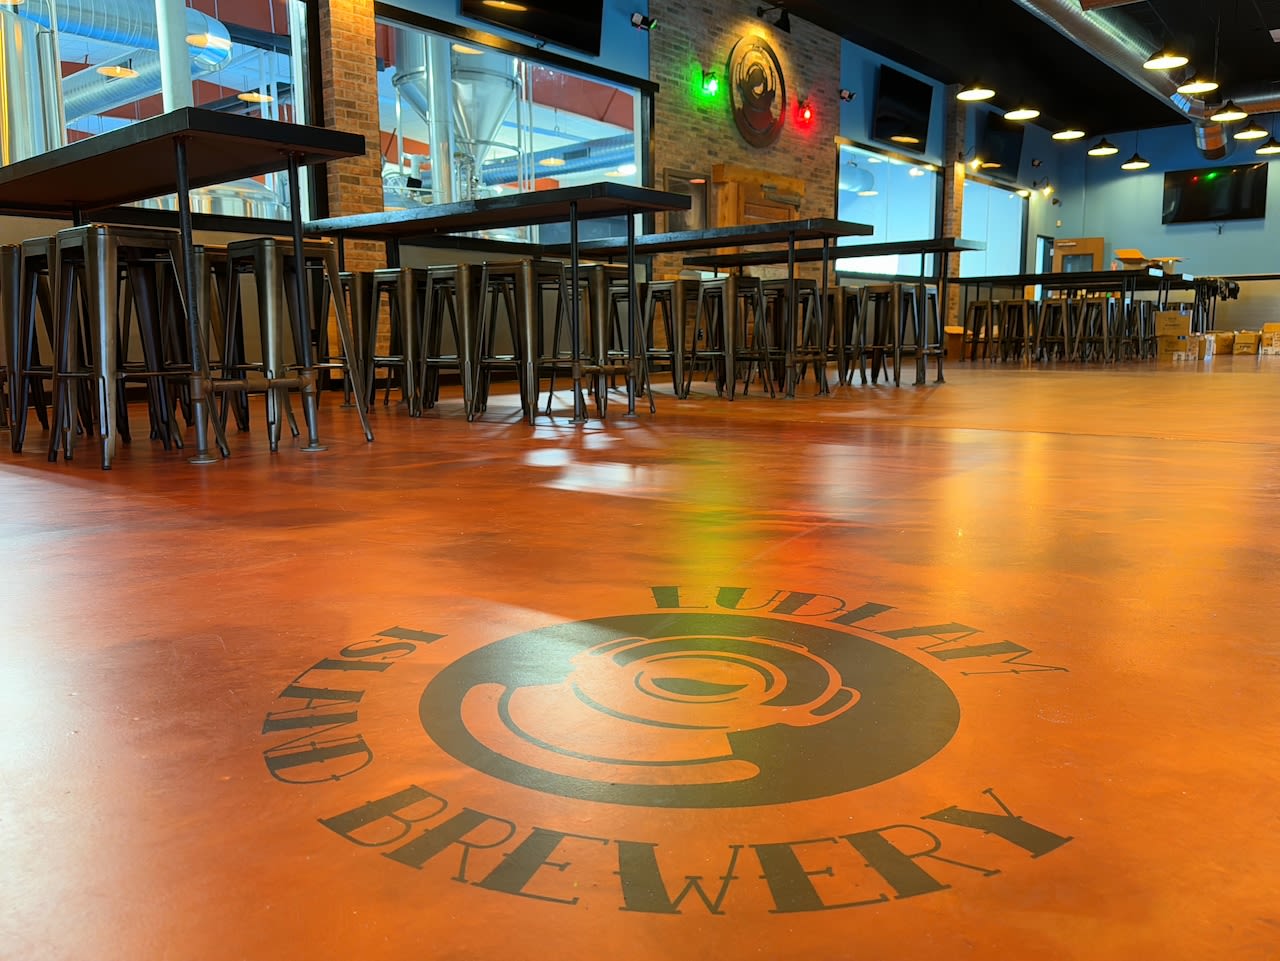 Brewery near Jersey Shore to open new location in renovated bowling alley